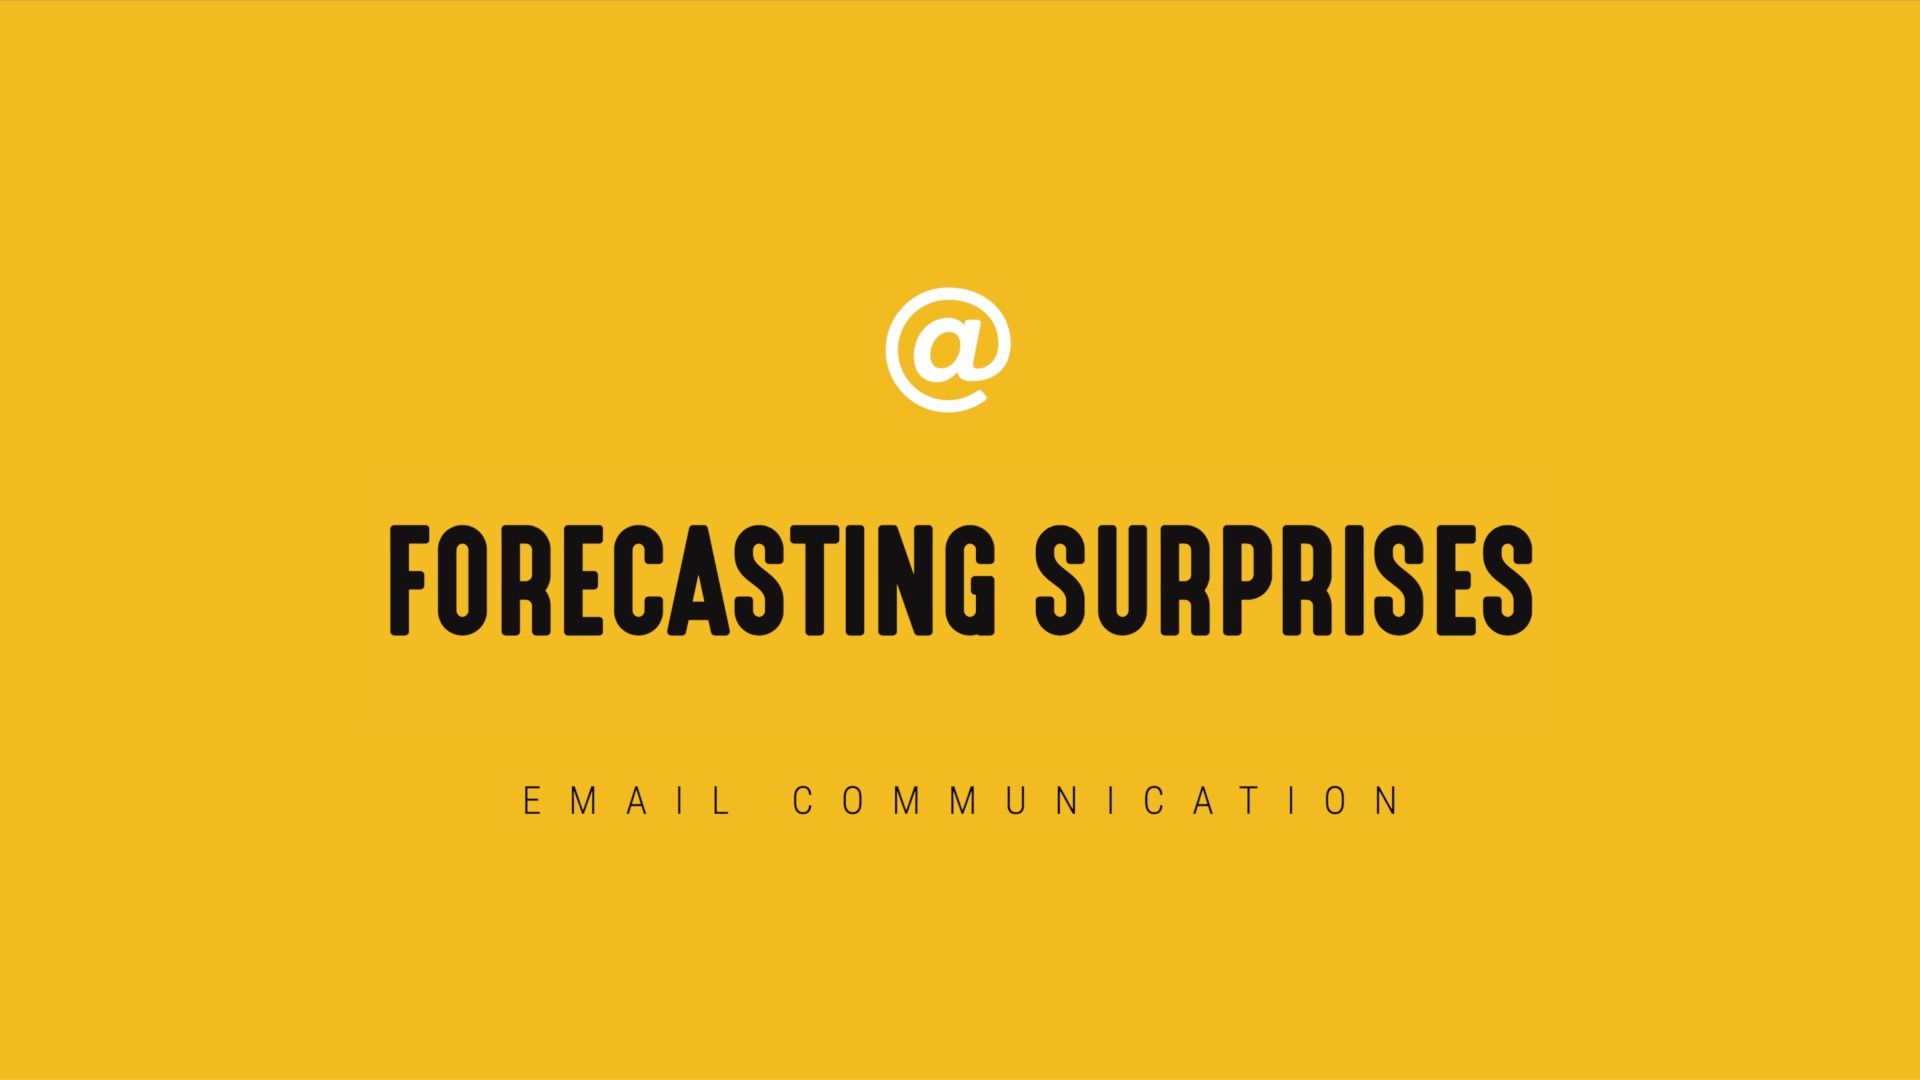 [NEW] Single-Topic Email | Forecasting Surprises